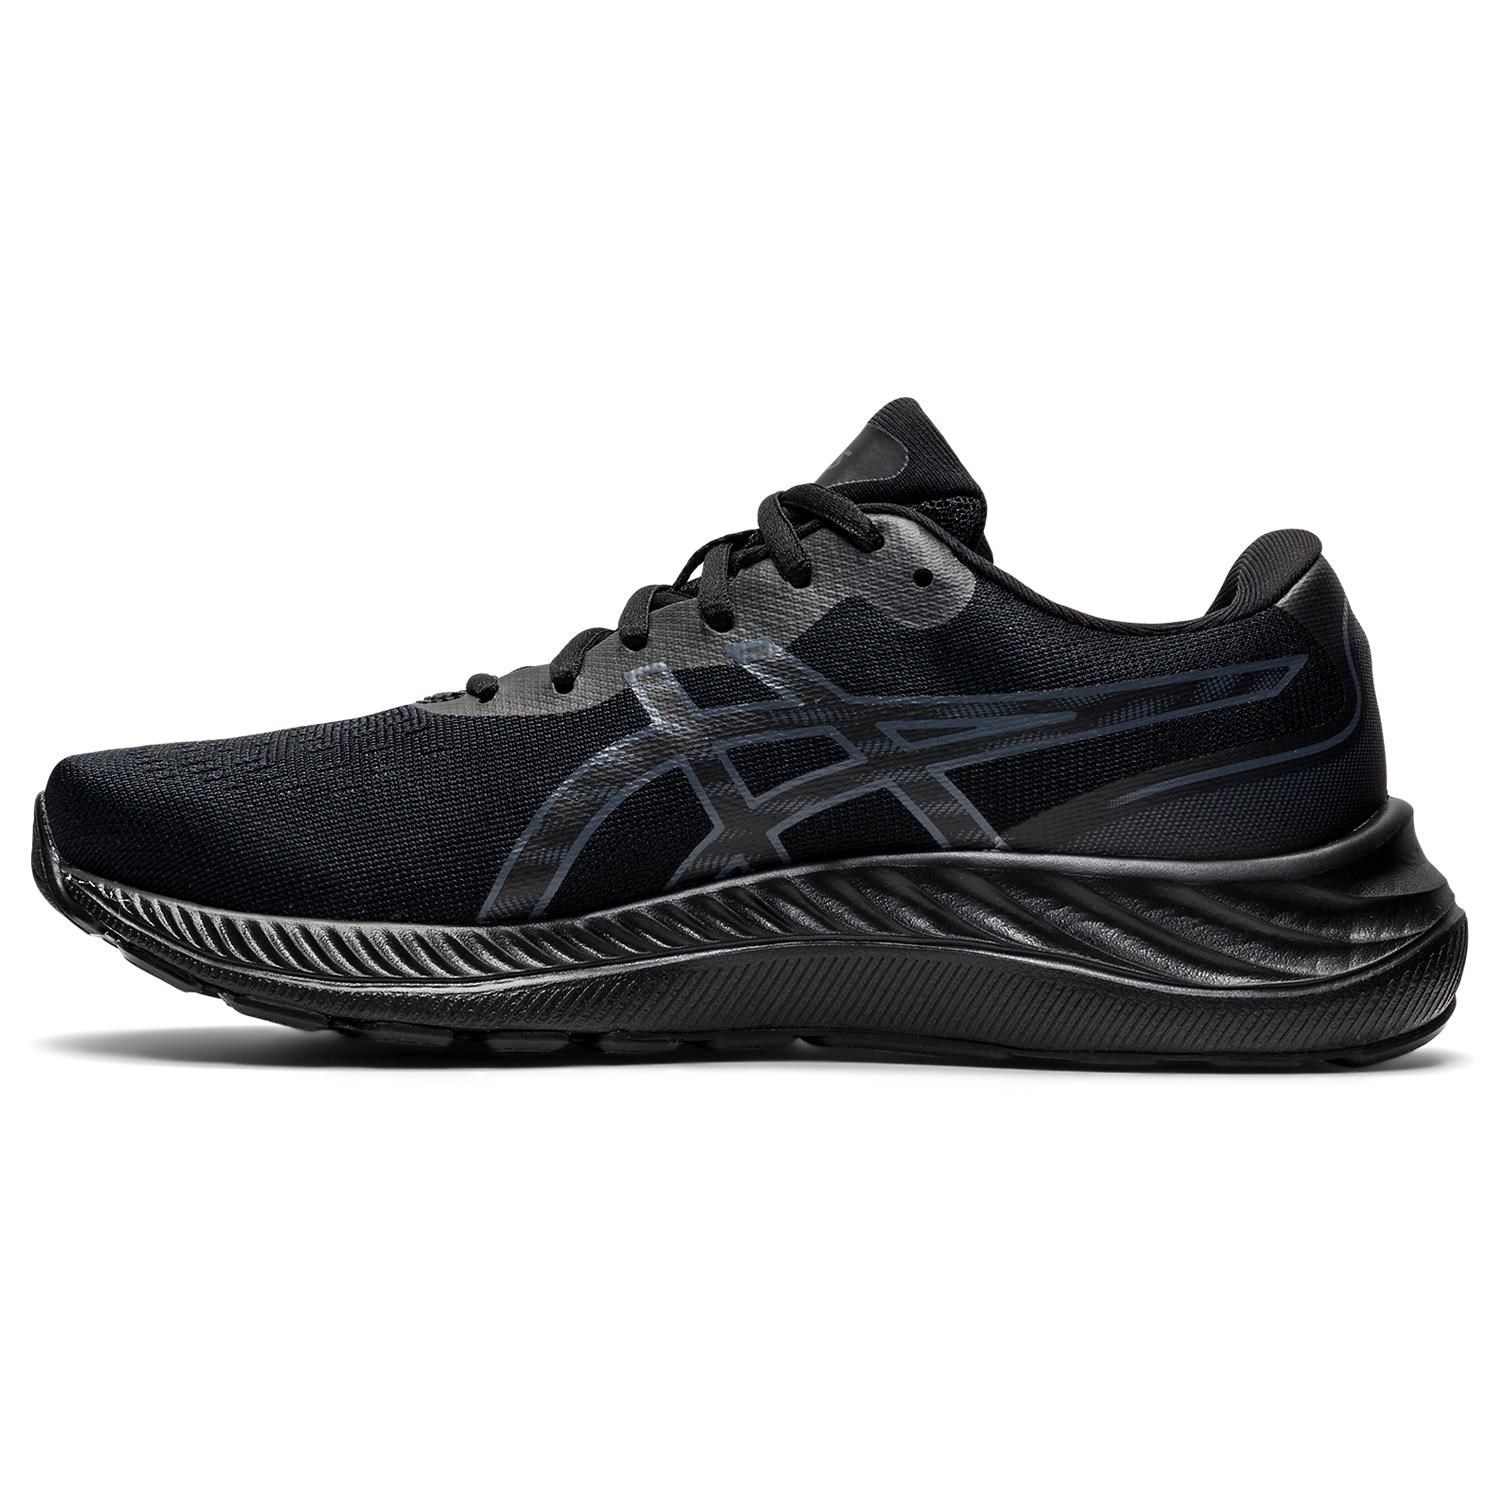 Asics Gel Excite 9 - Womens Running Shoes - Black/Carrier Grey | Sportitude